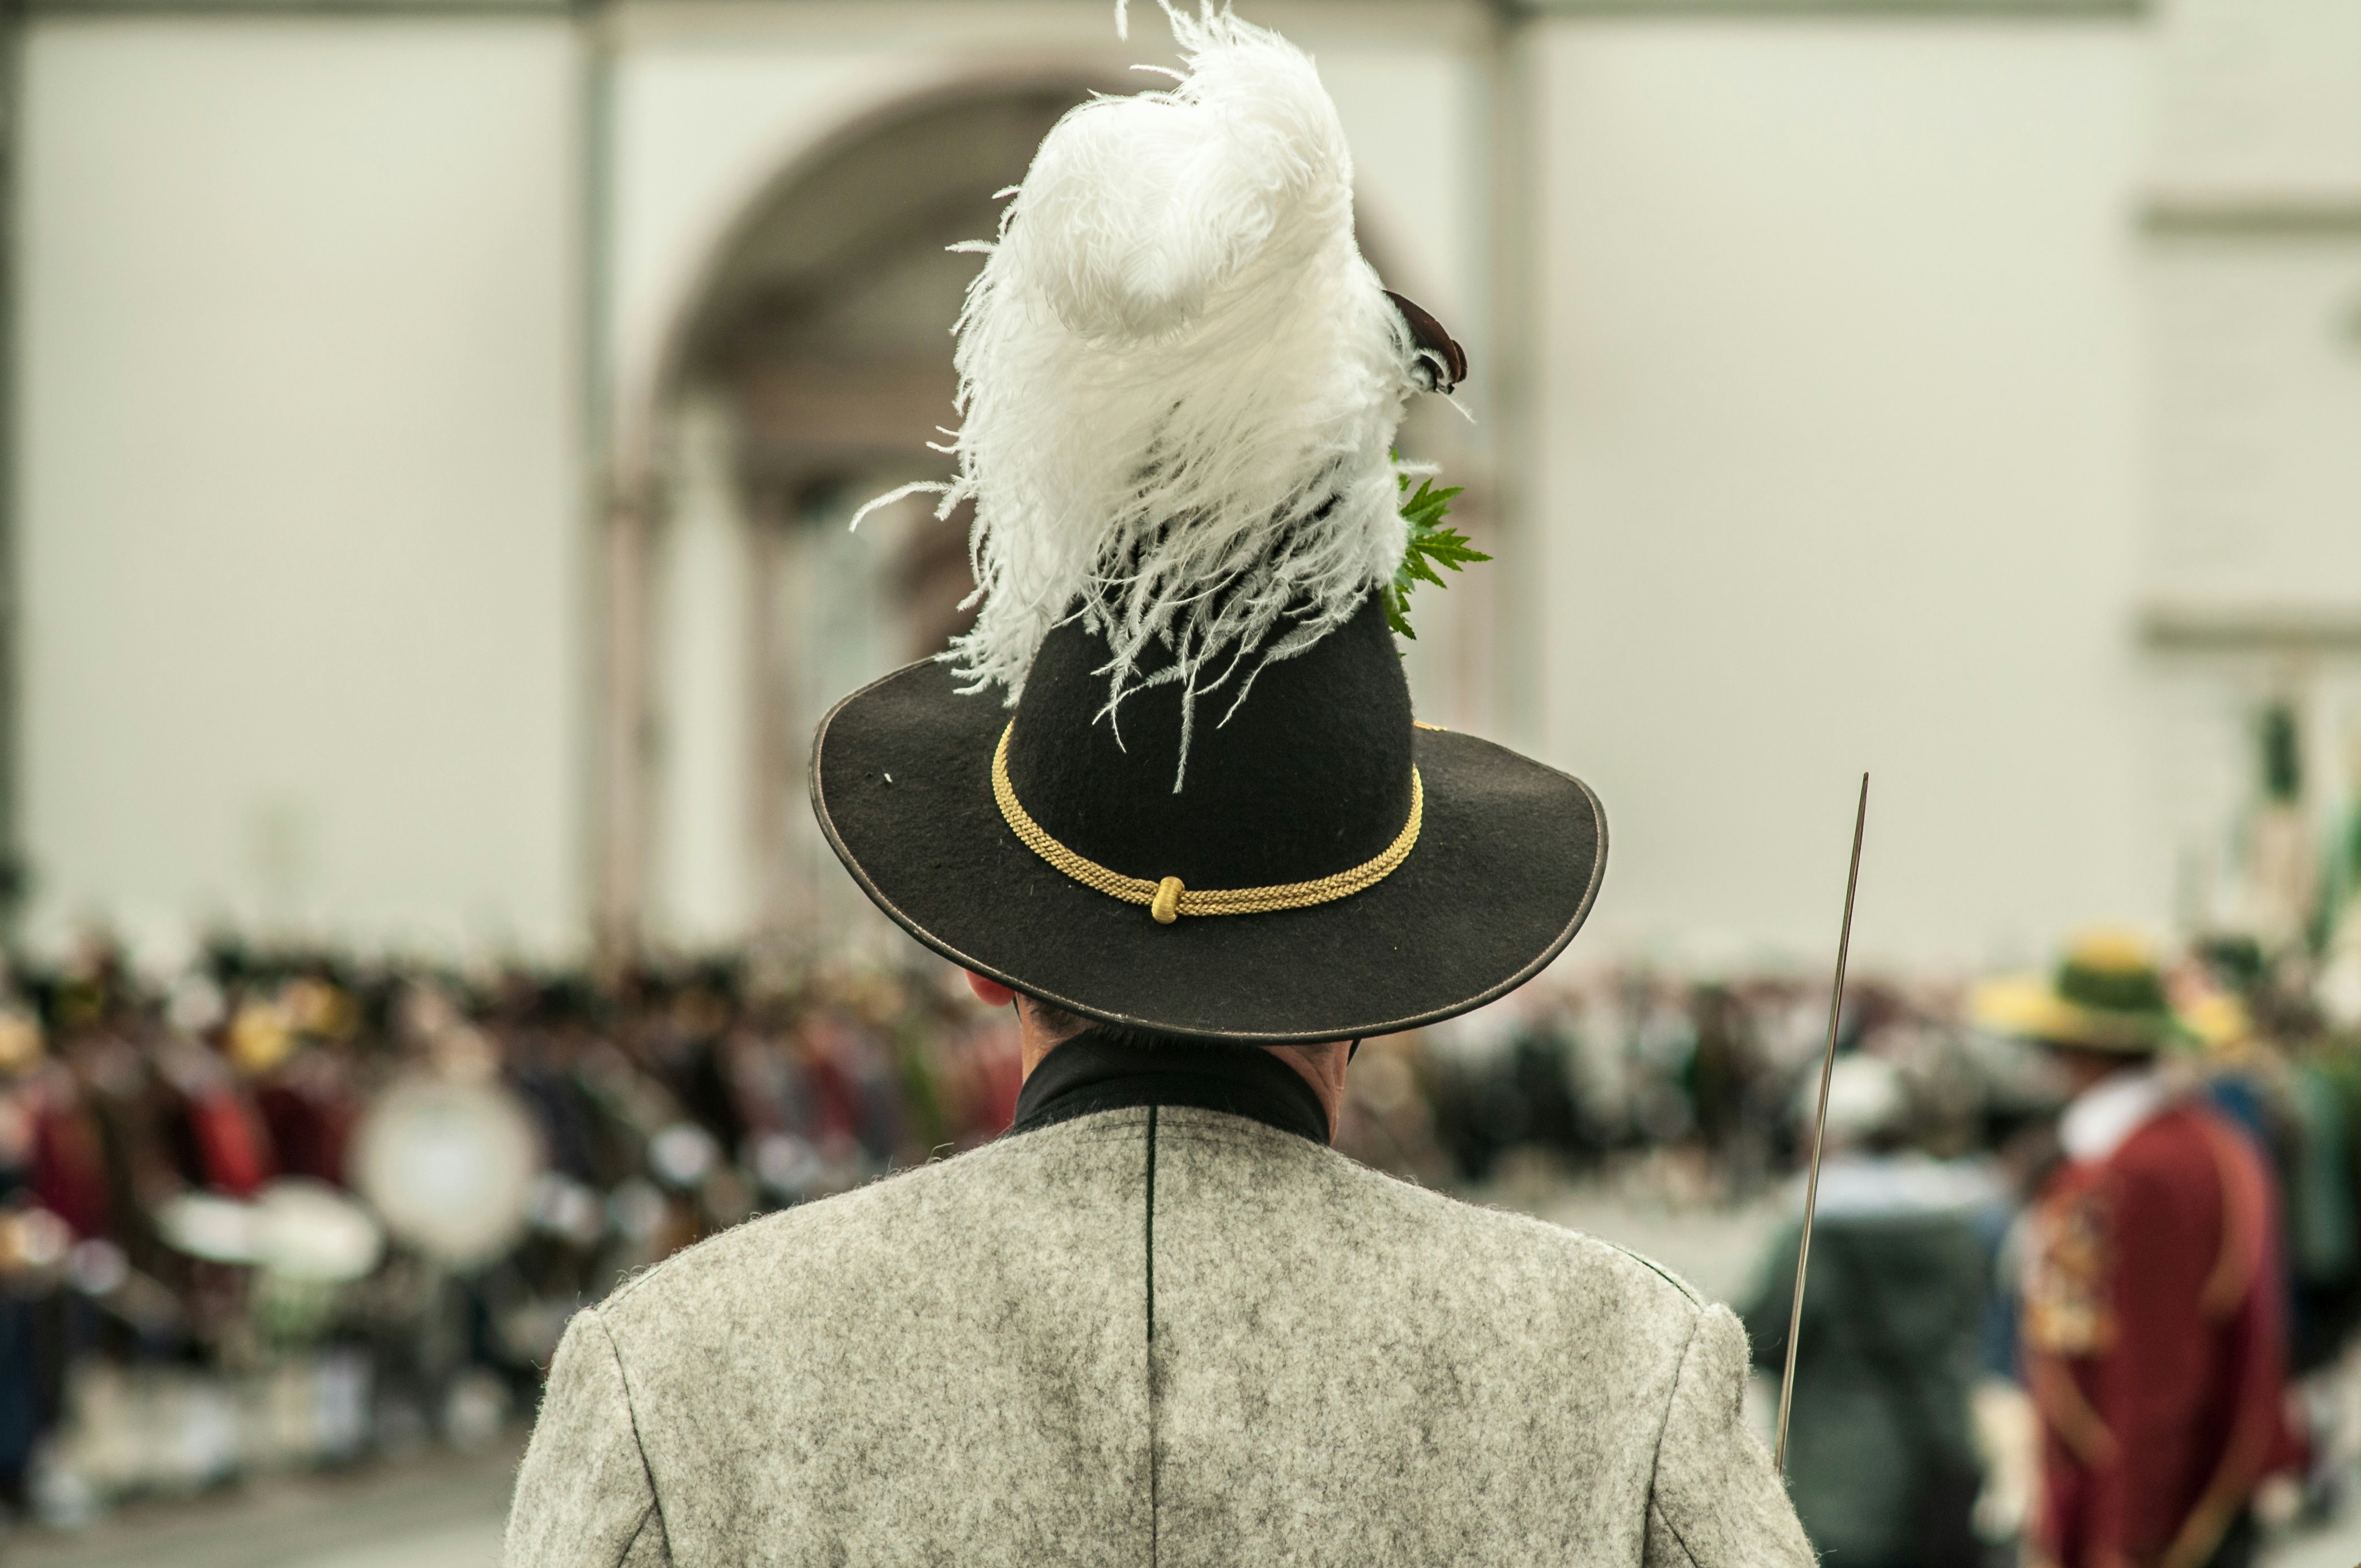 men wearing a feathered hat during daytime